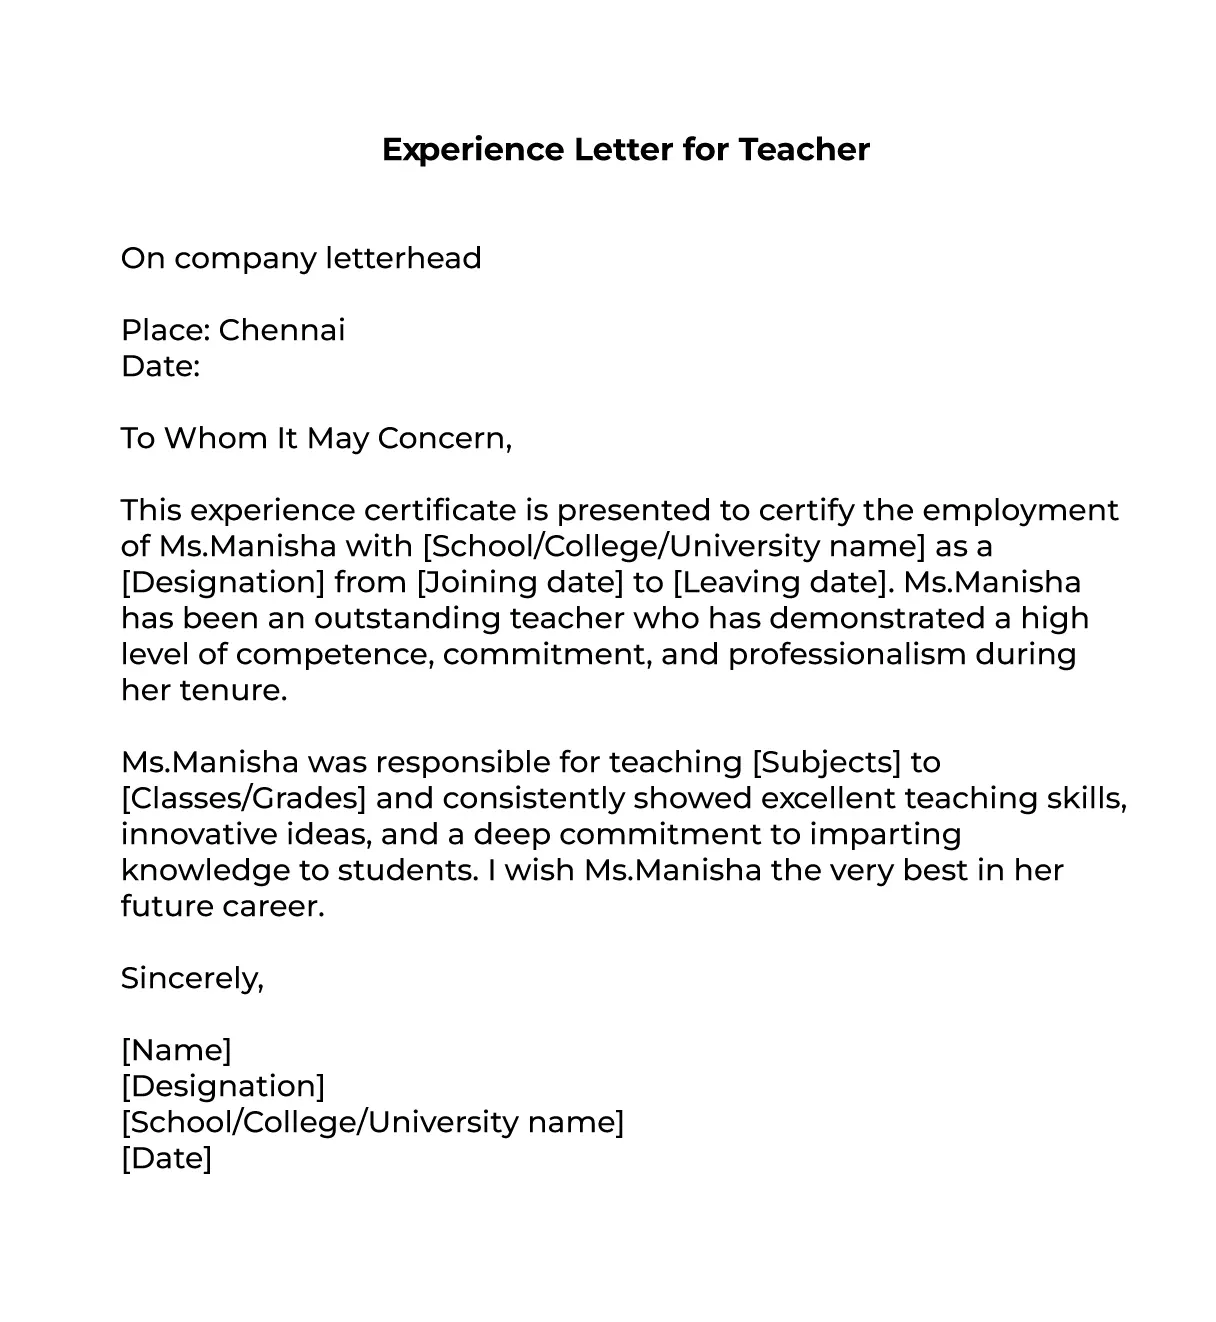 template for experience certificate